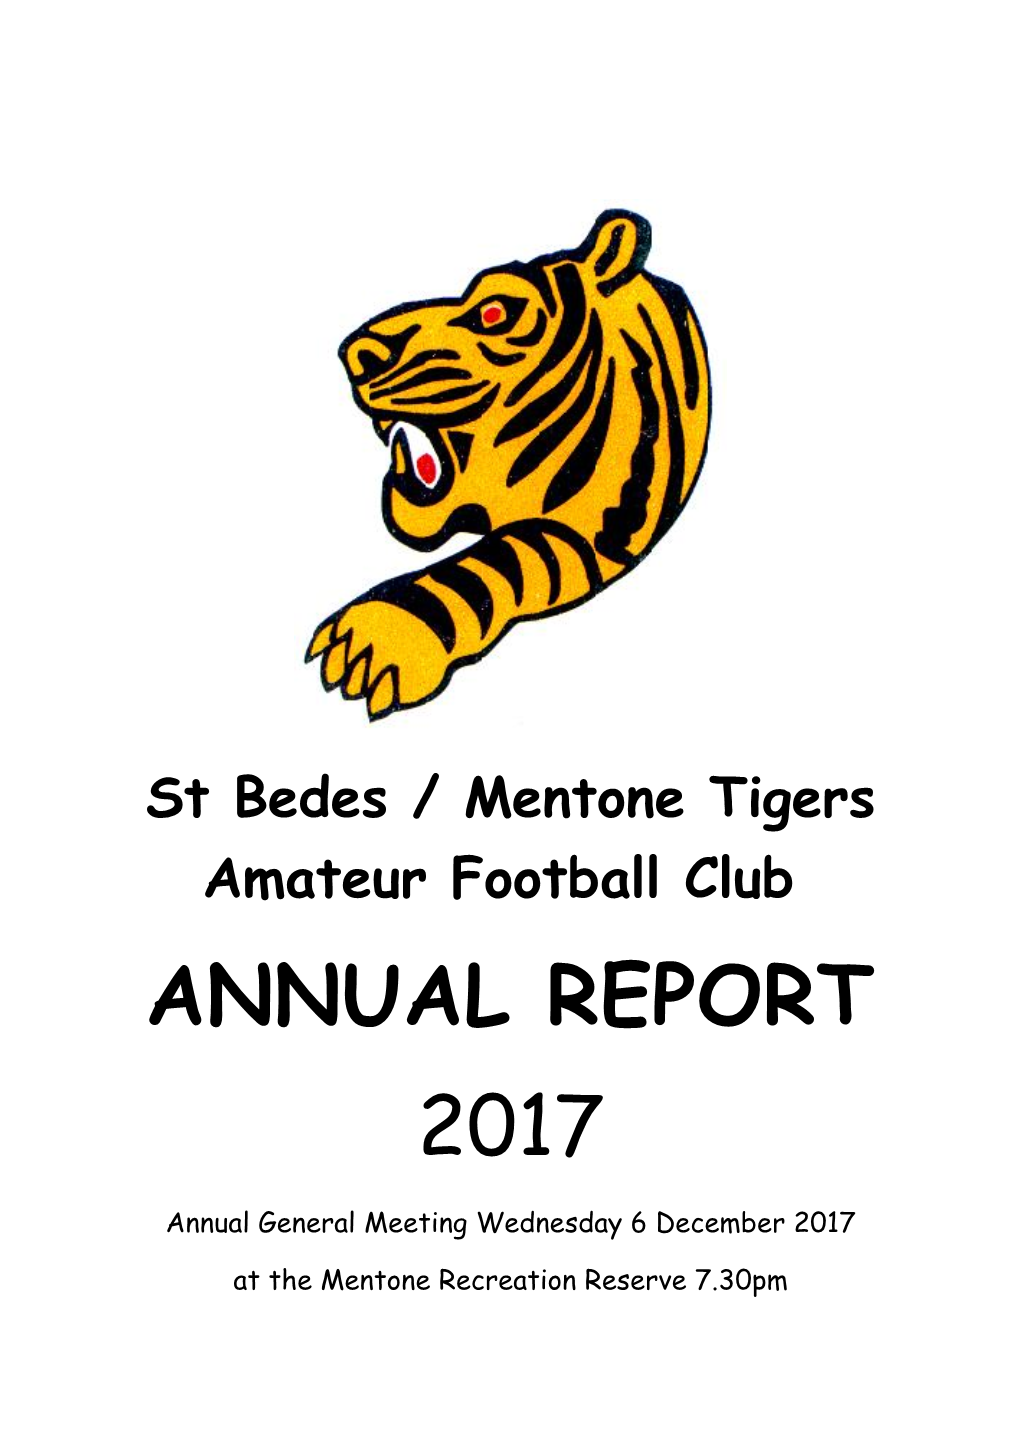 St Bedes / Mentone Tigers Amateur Football Club ANNUAL REPORT 2017